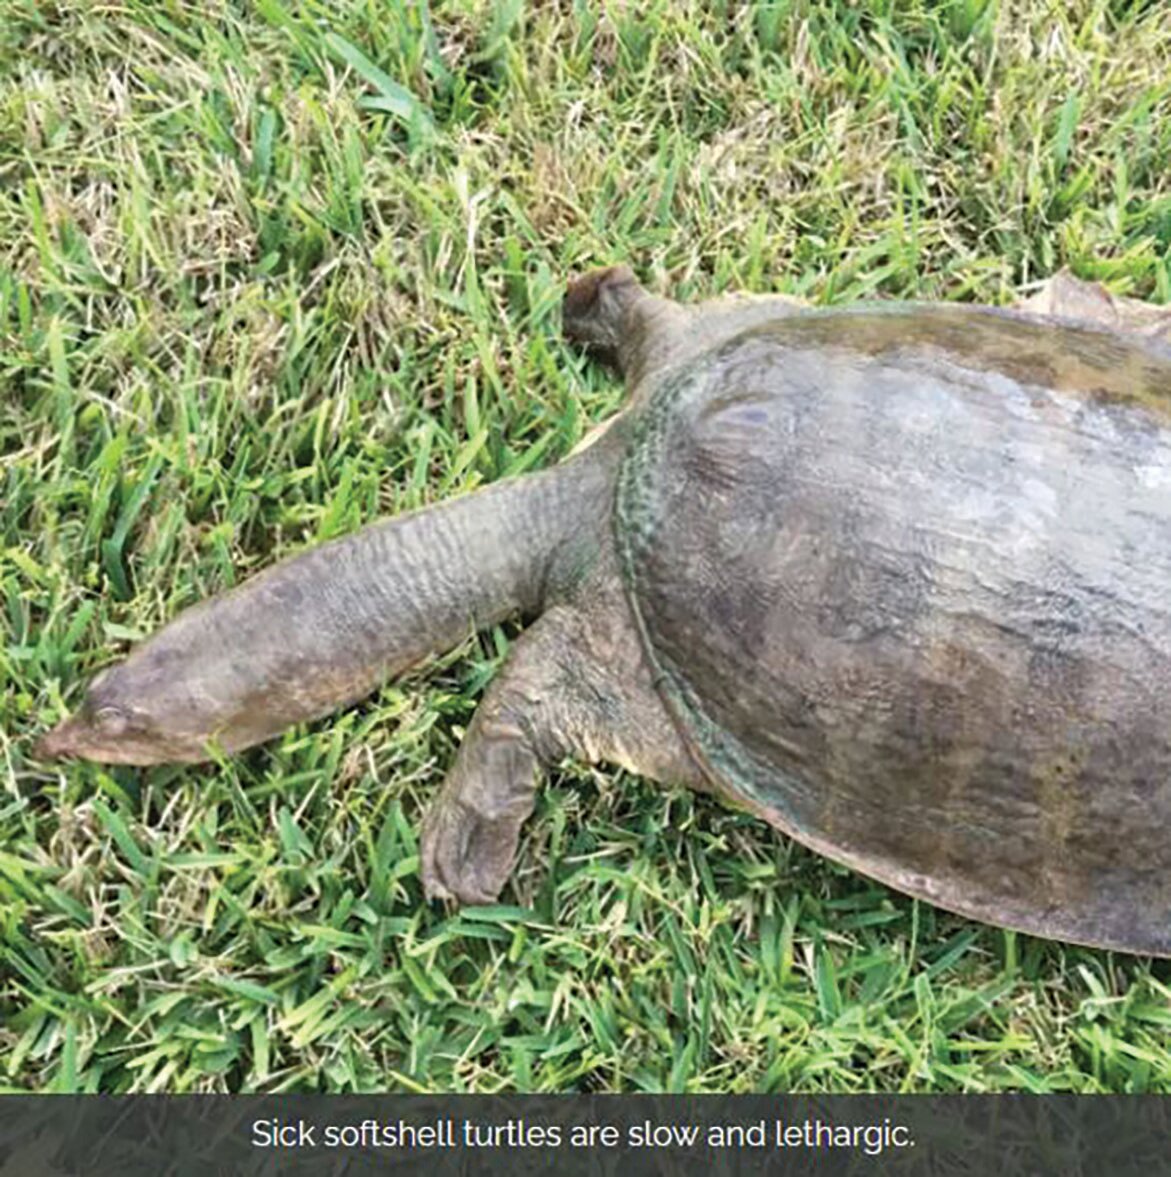 Sick softshell turtles are slow and lethargic.